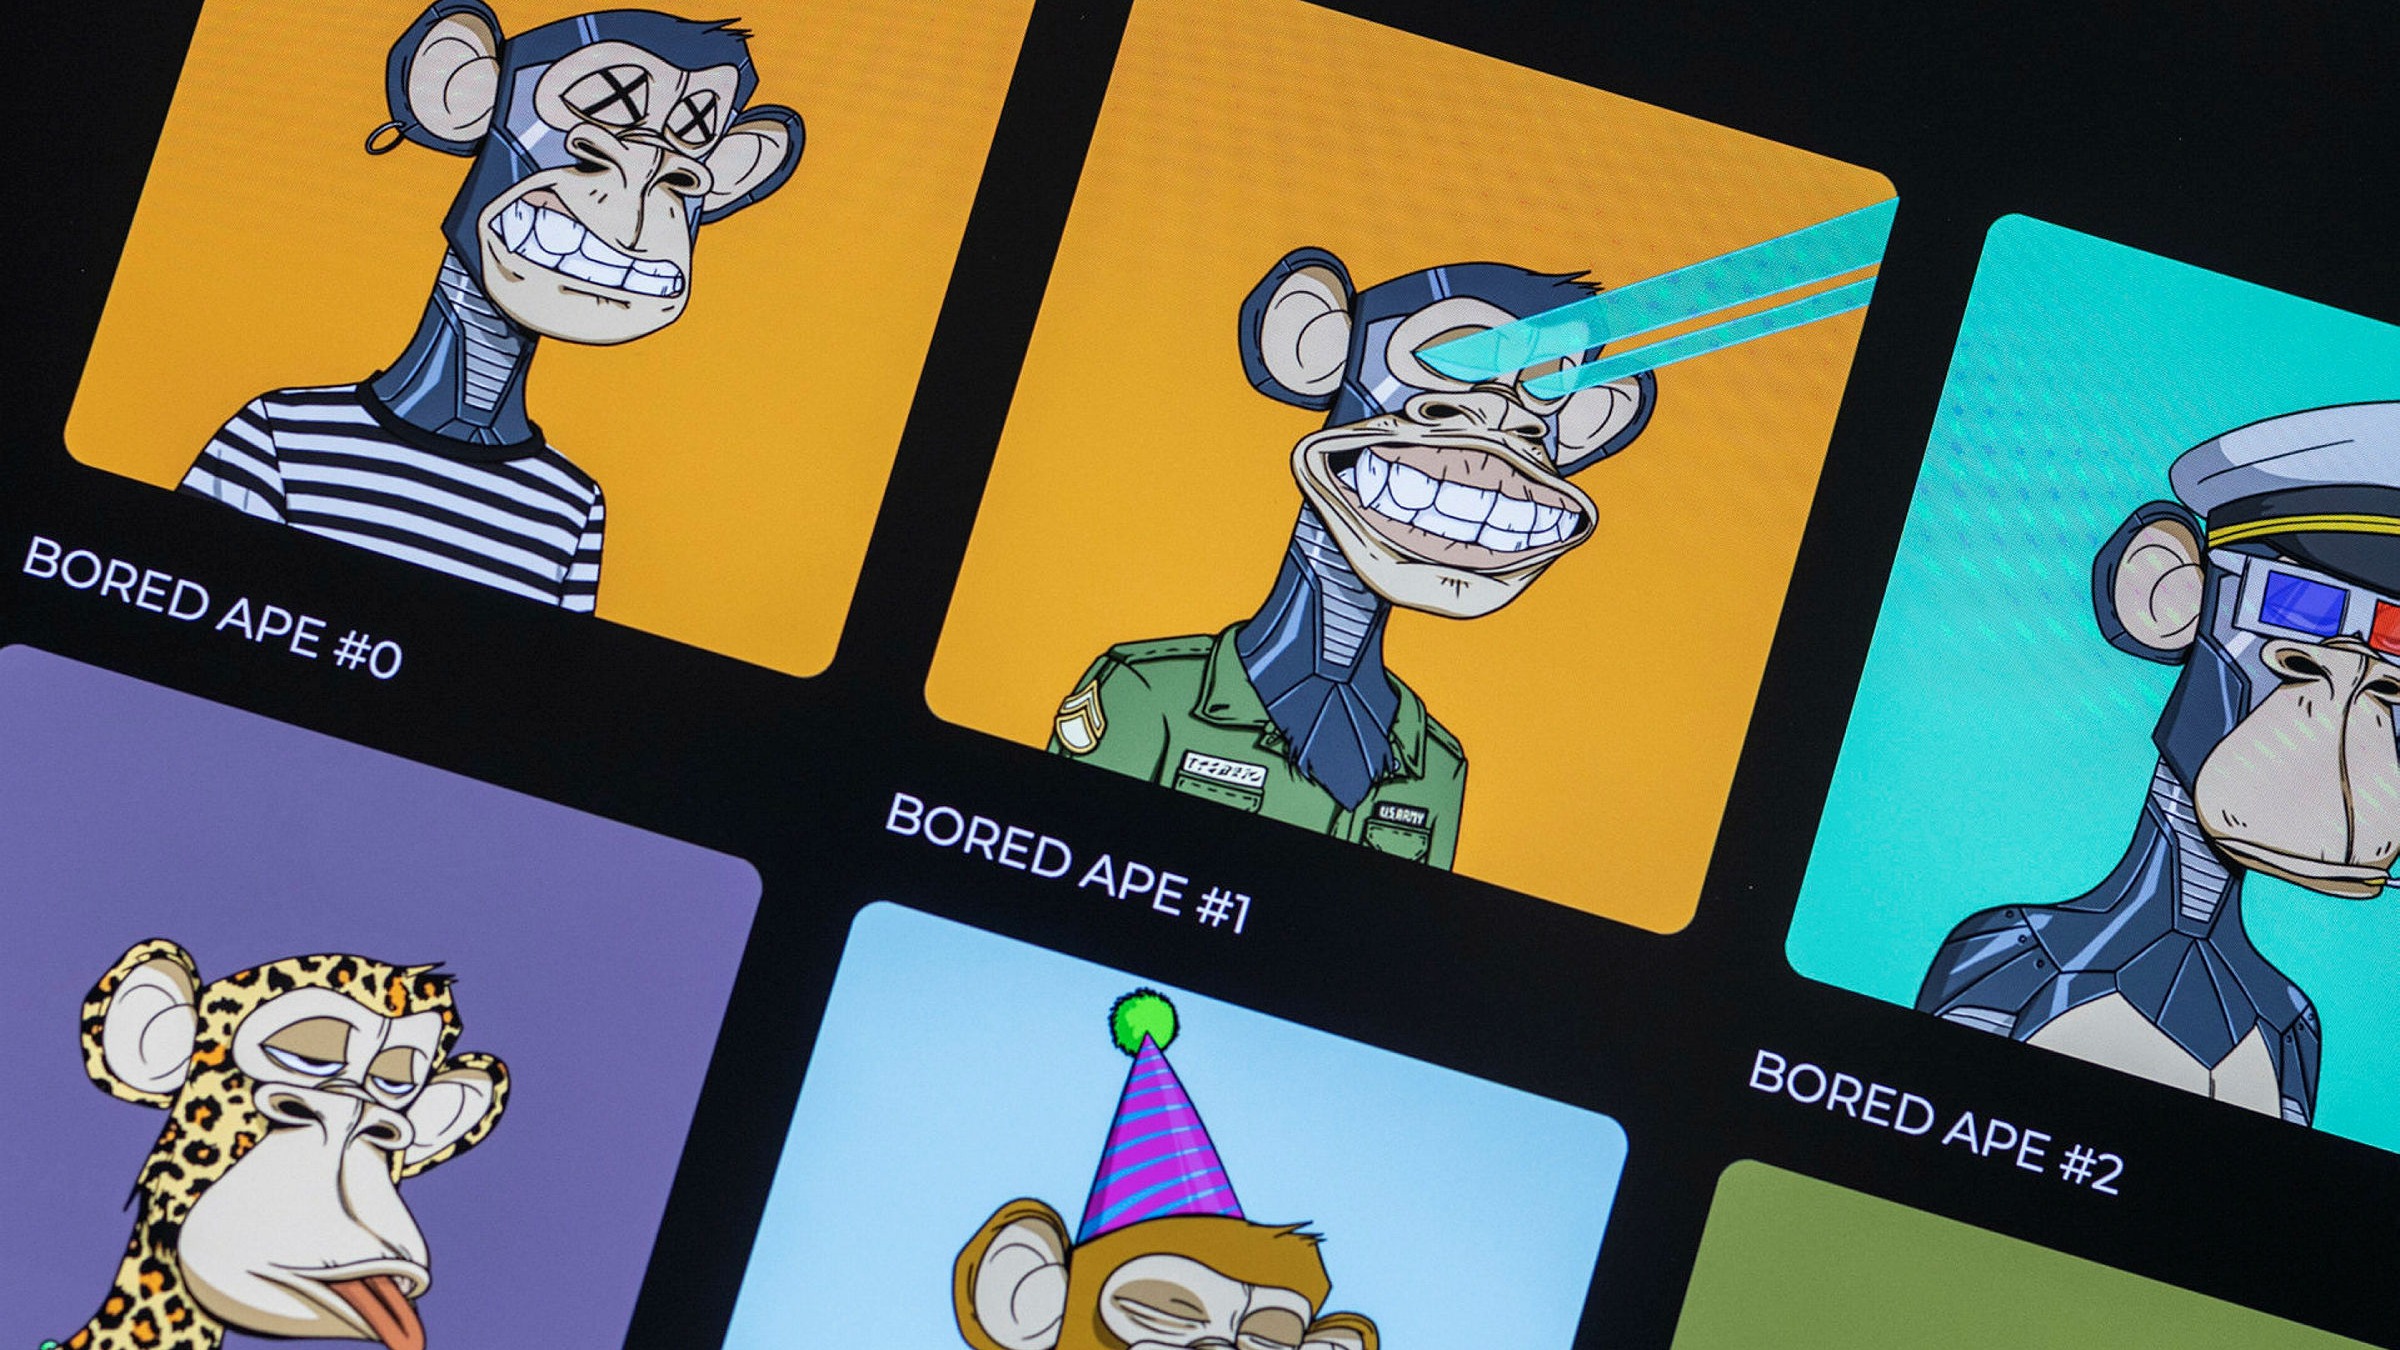 Rare monkey - Mint Space NFT Marketplace - Buy, Sell and Create NFTs Art  Tokens without Fees